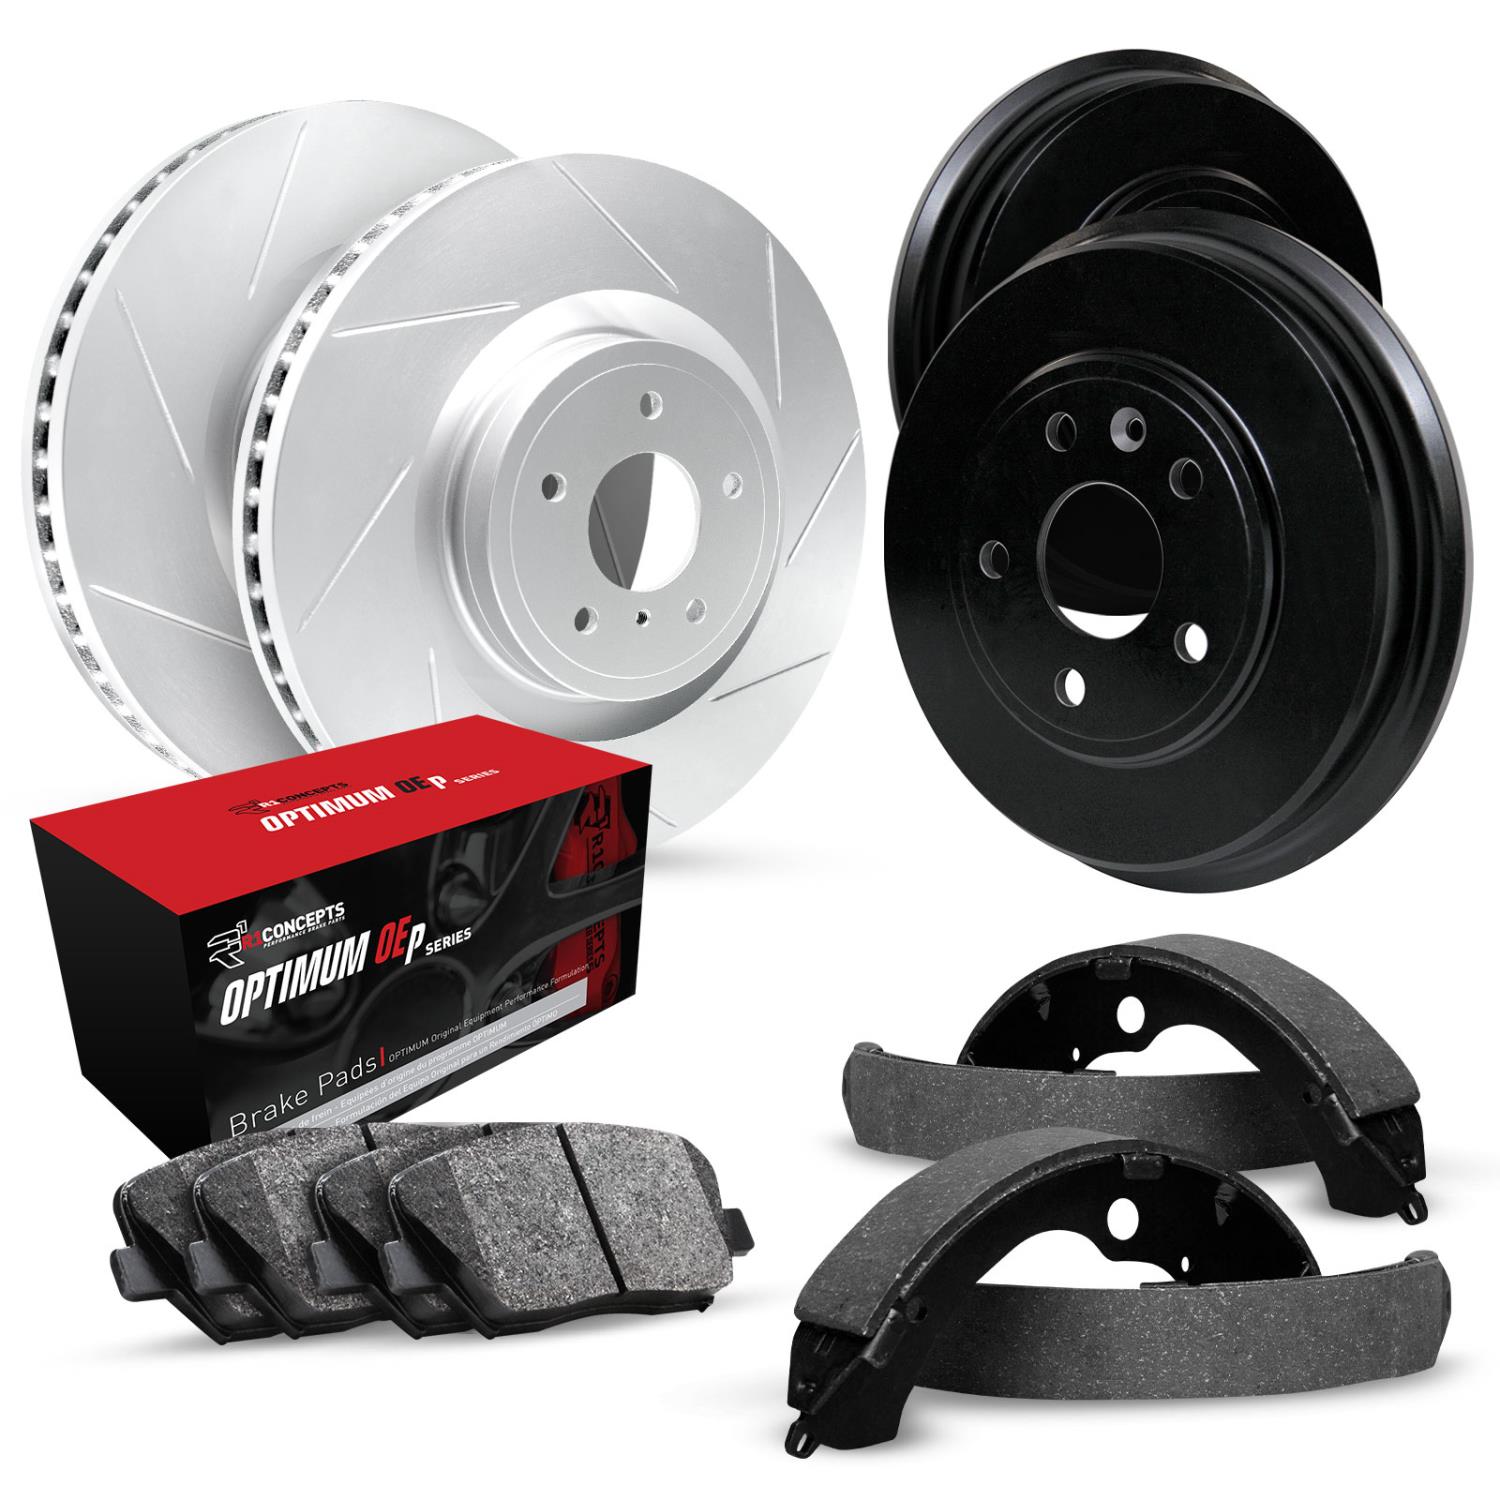 GEO-Carbon Slotted Brake Rotor & Drum Set w/Optimum OE Pads & Shoes, 1971-1976 GM, Position: Front & Rear